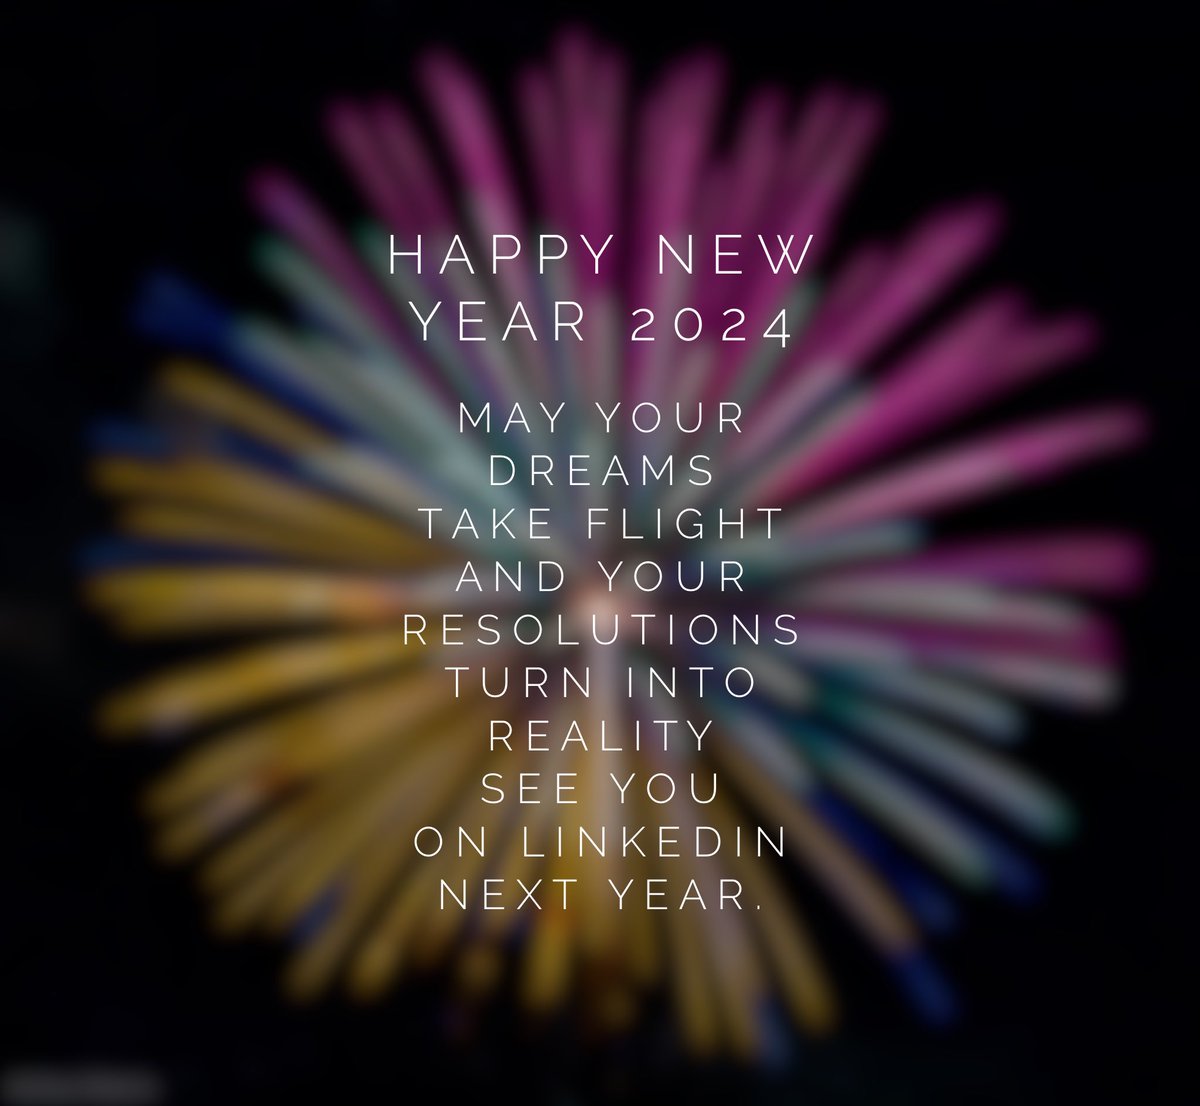 ʜᴀᴘᴘʏ ɴᴇᴡ ʏᴇᴀʀ 2024 🎉 Wishing you all the best! Would love to connect on #LinkedIn, as I plan to focus my activities there from 2024. Looking forward to seeing you again soon online or in real life. 🔗 de.linkedin.com/in/wwolters #HappyNewYear #HappyNewYear2024